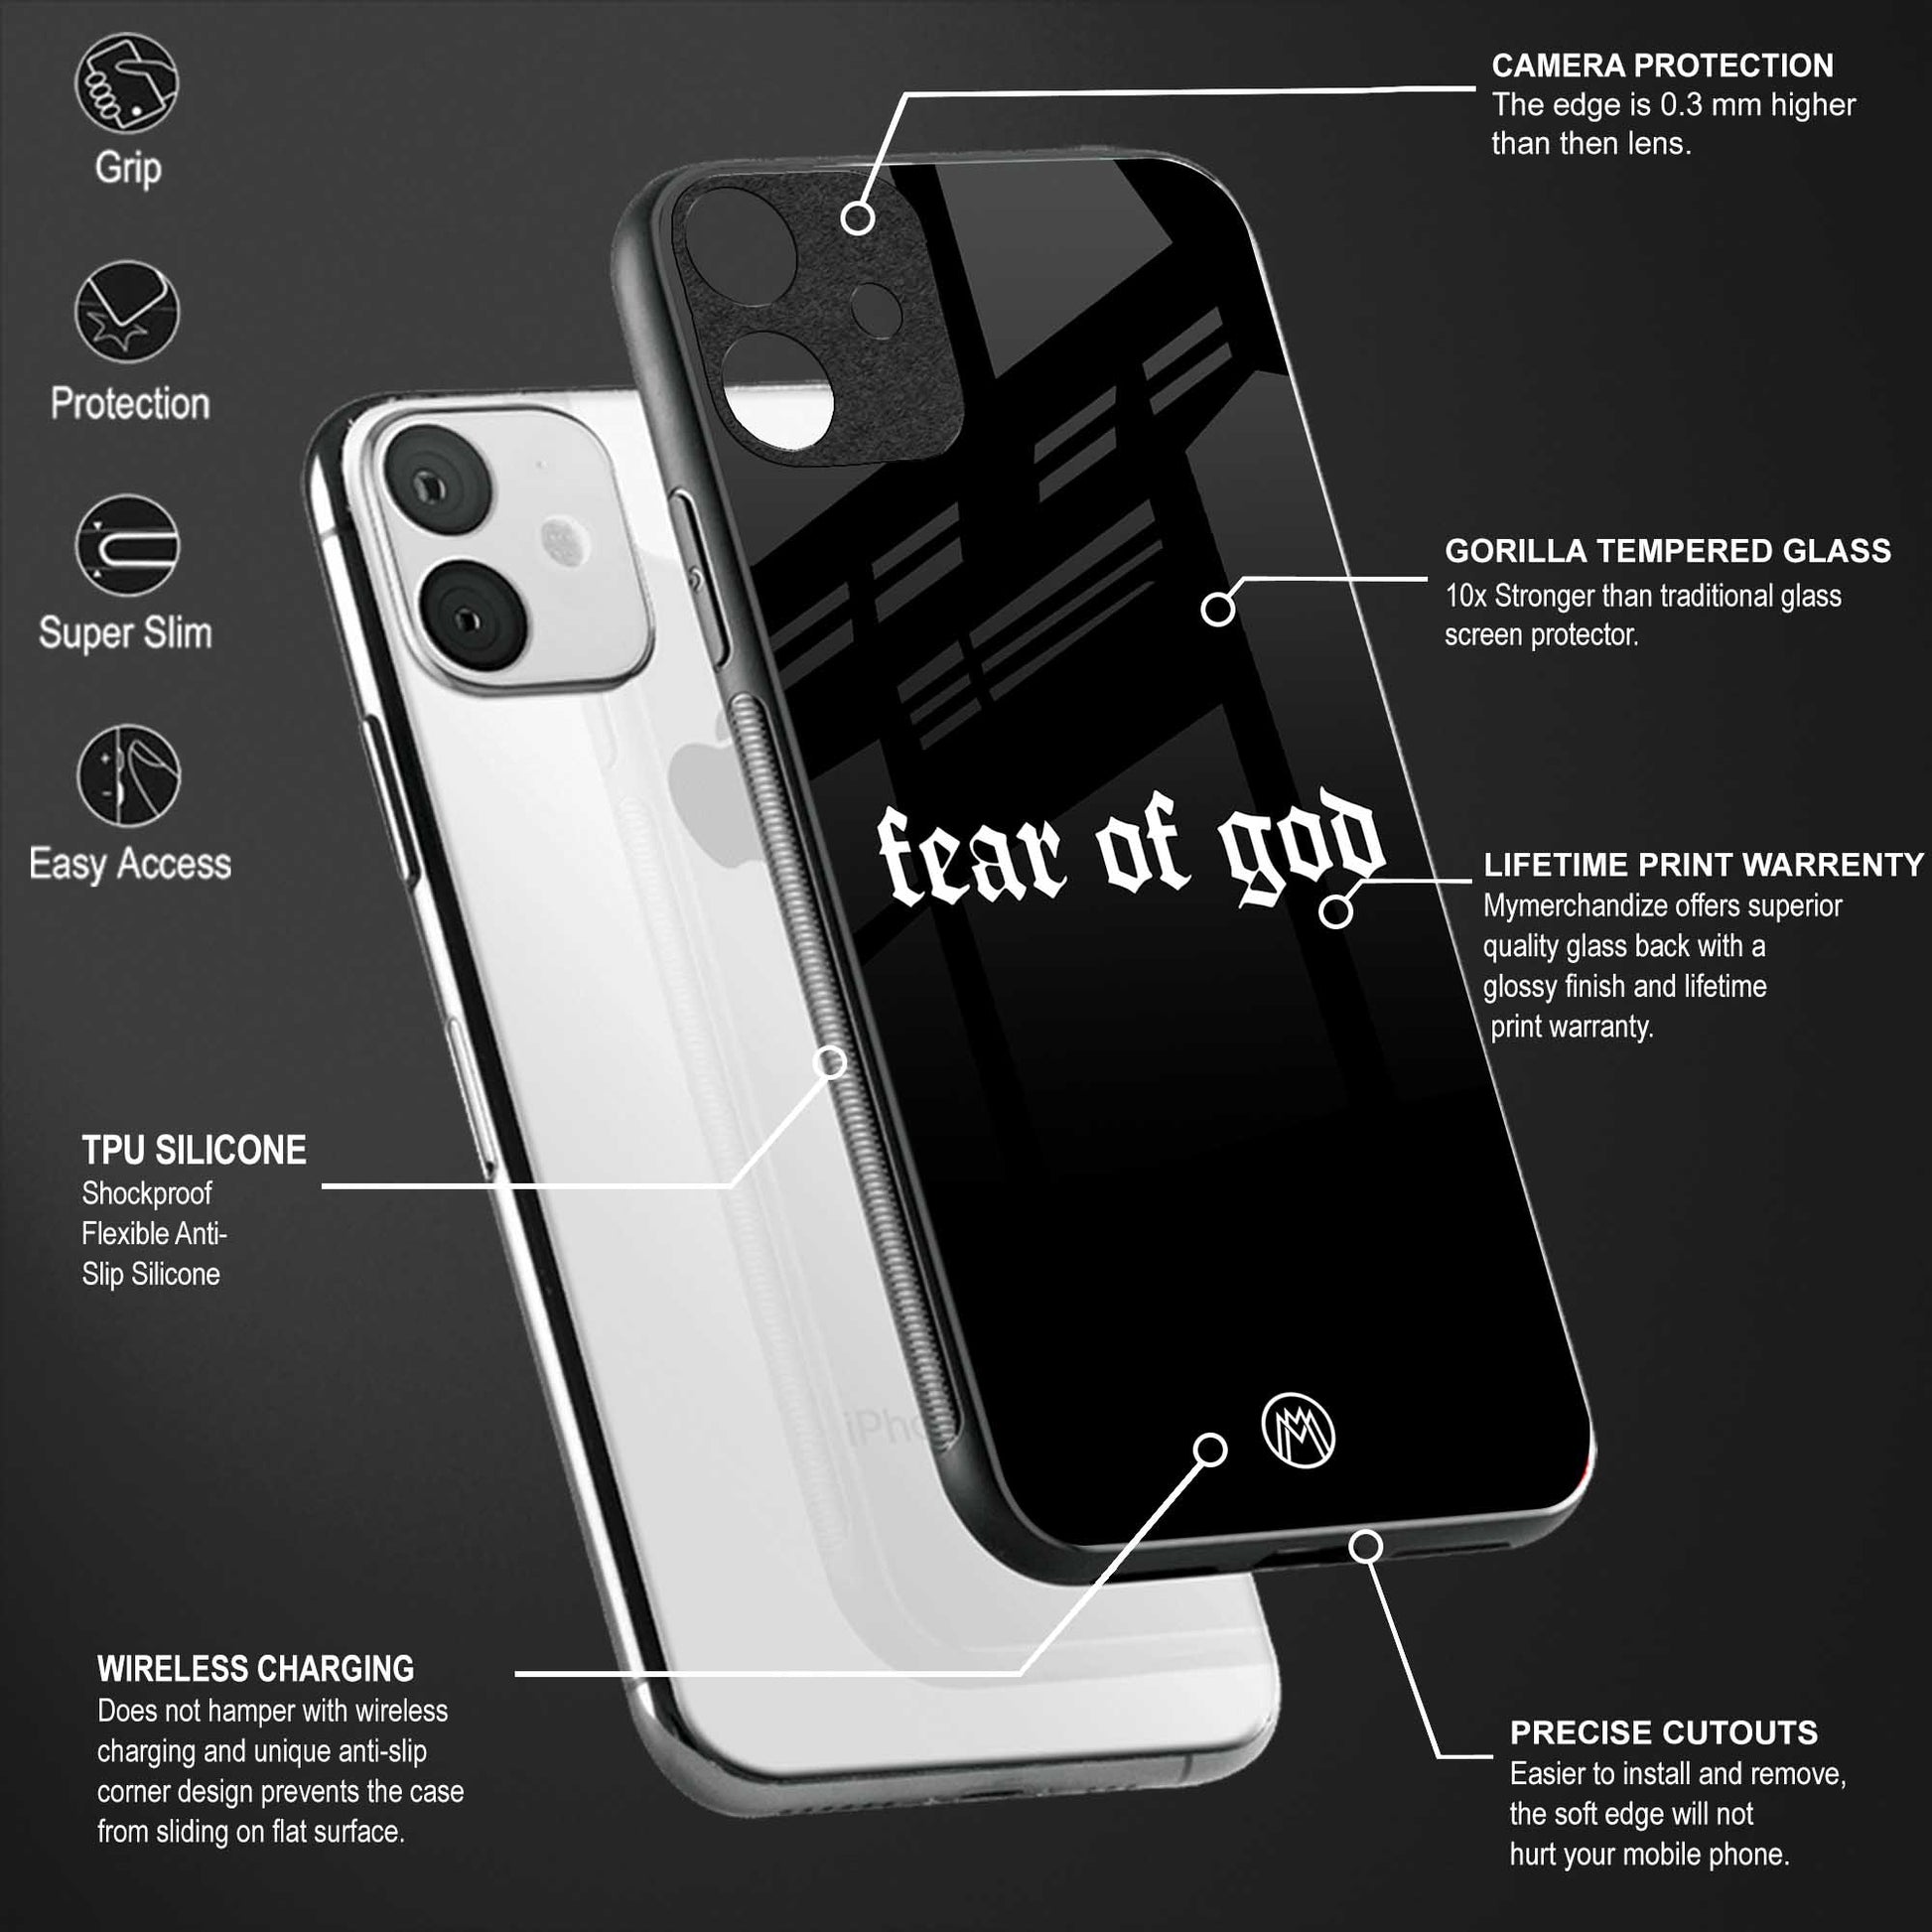 fear of god phone cover for iphone 7